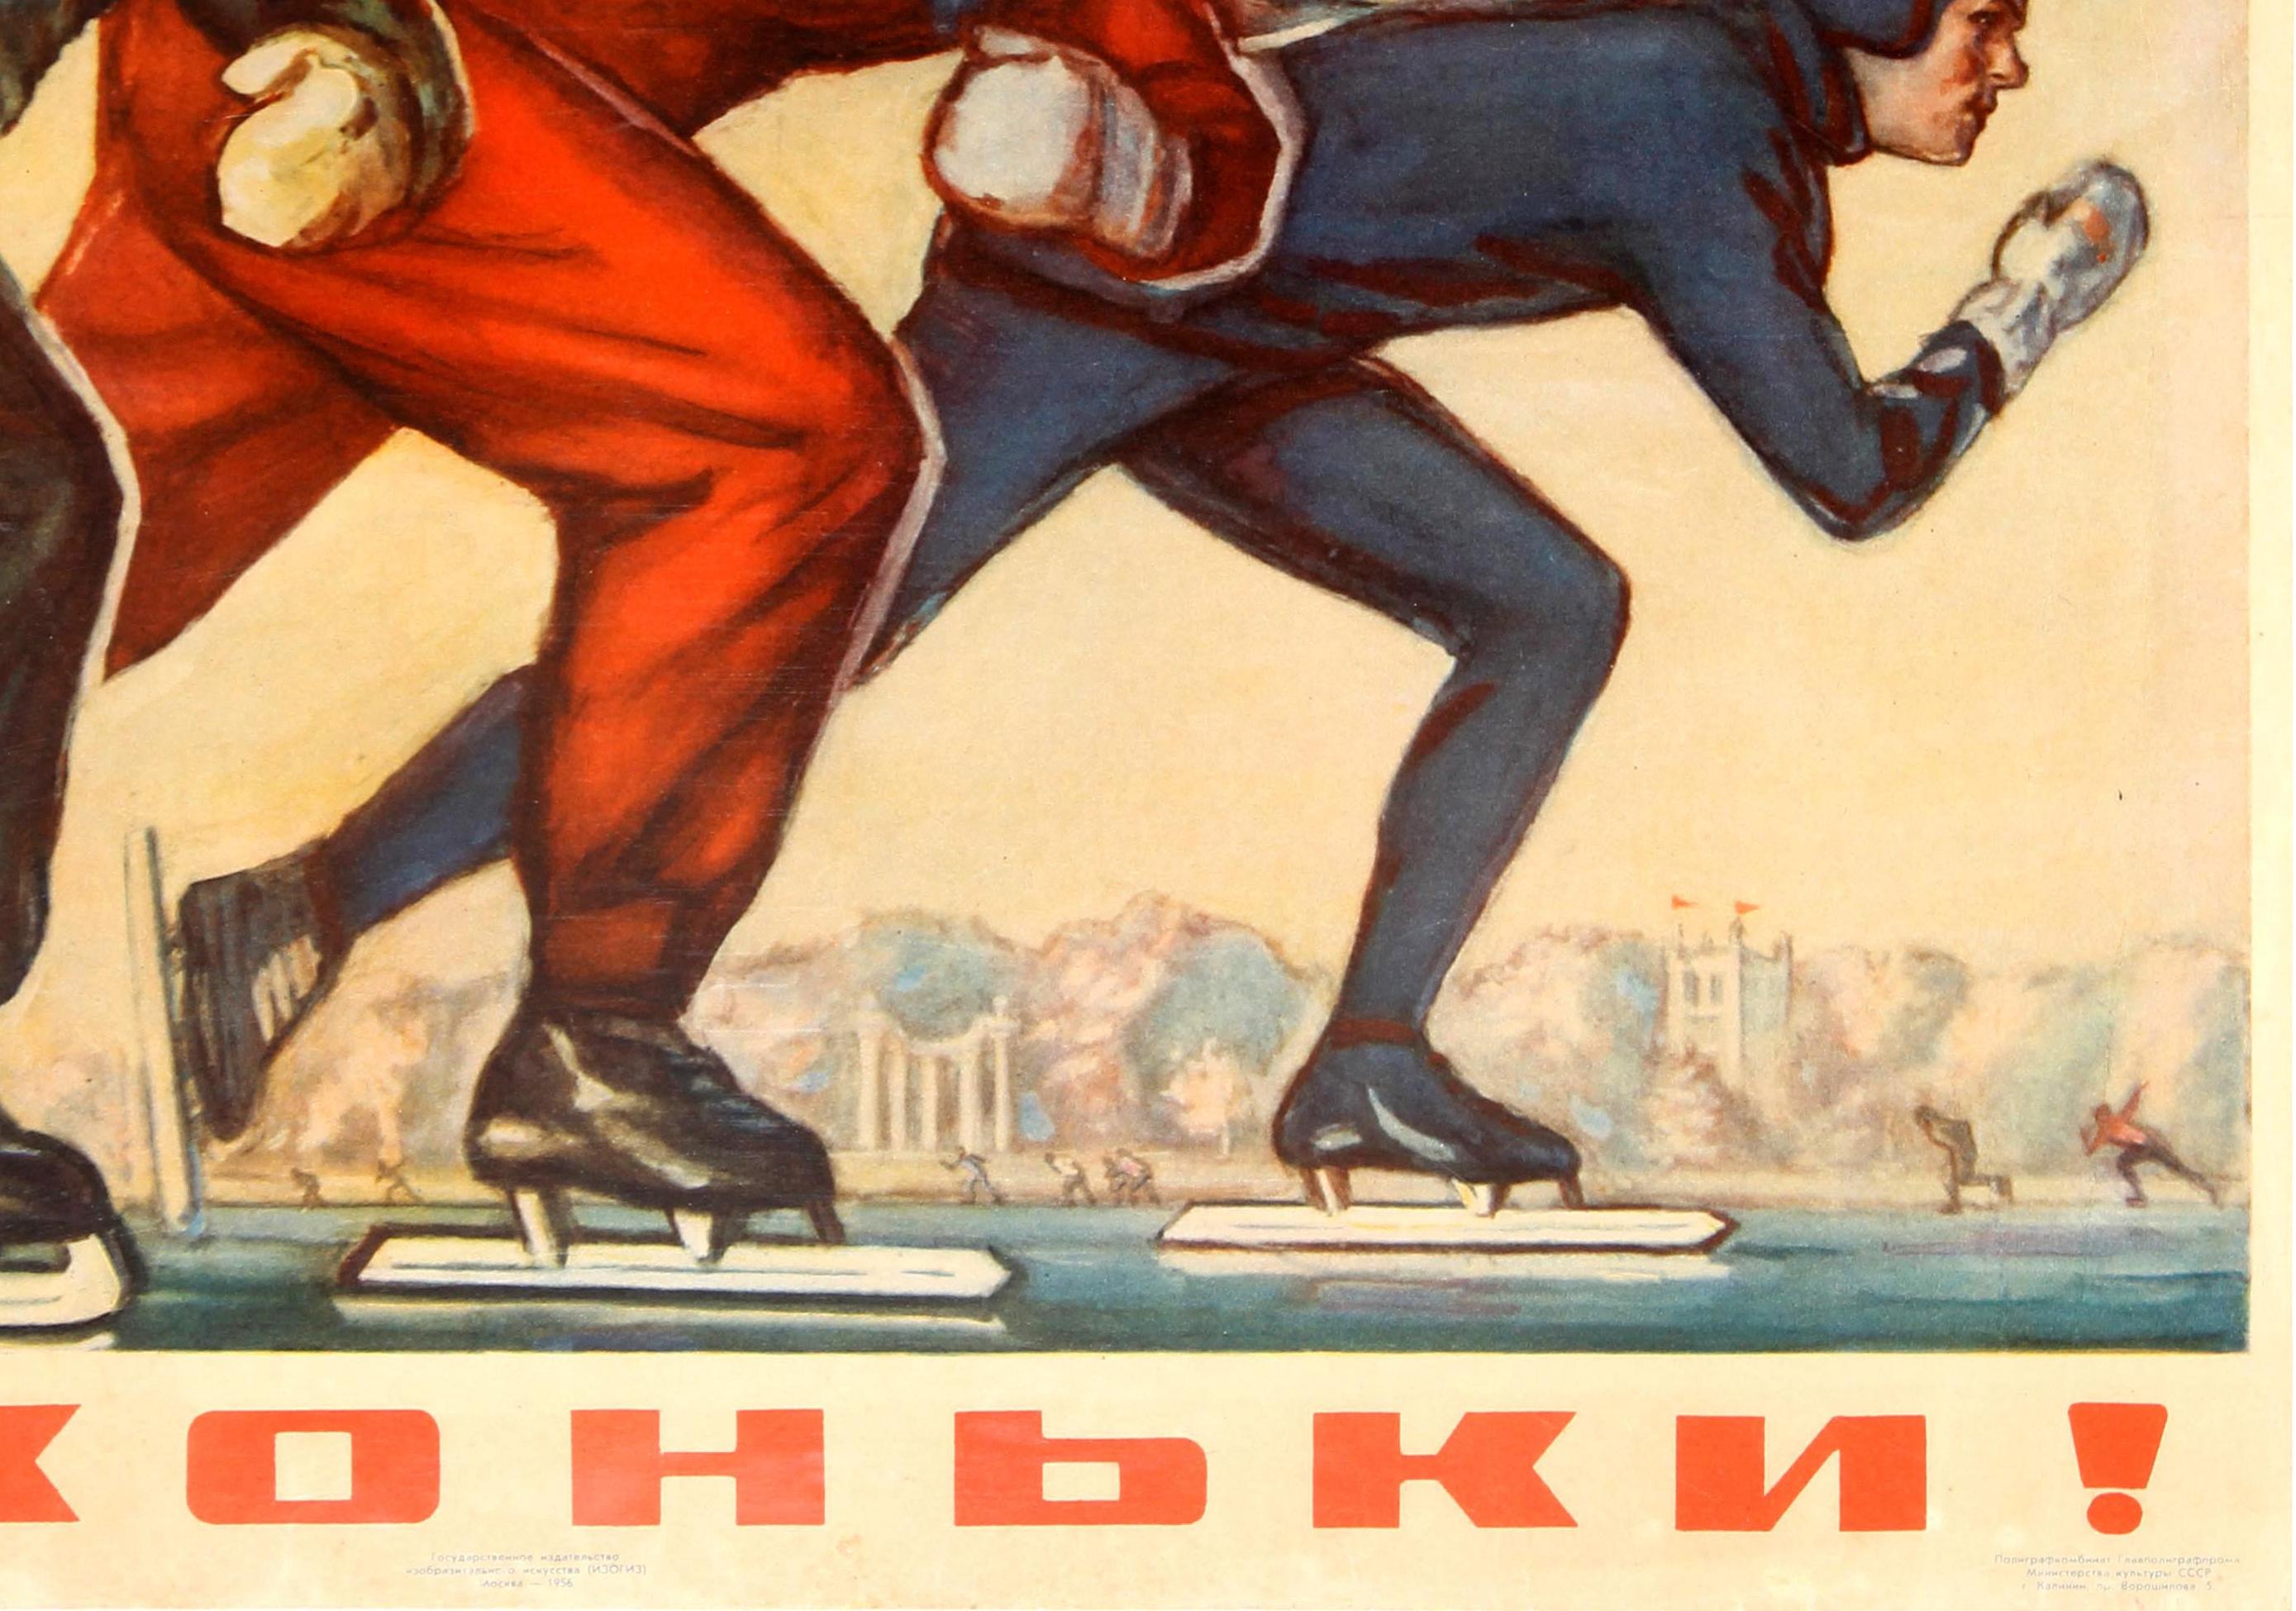 Original vintage Soviet sport propaganda poster promoting ice skating for good health and physical exercise - On your skates! Great illustration showing a family ice skating, the smiling child looking at the viewer and the man and lady skating on an